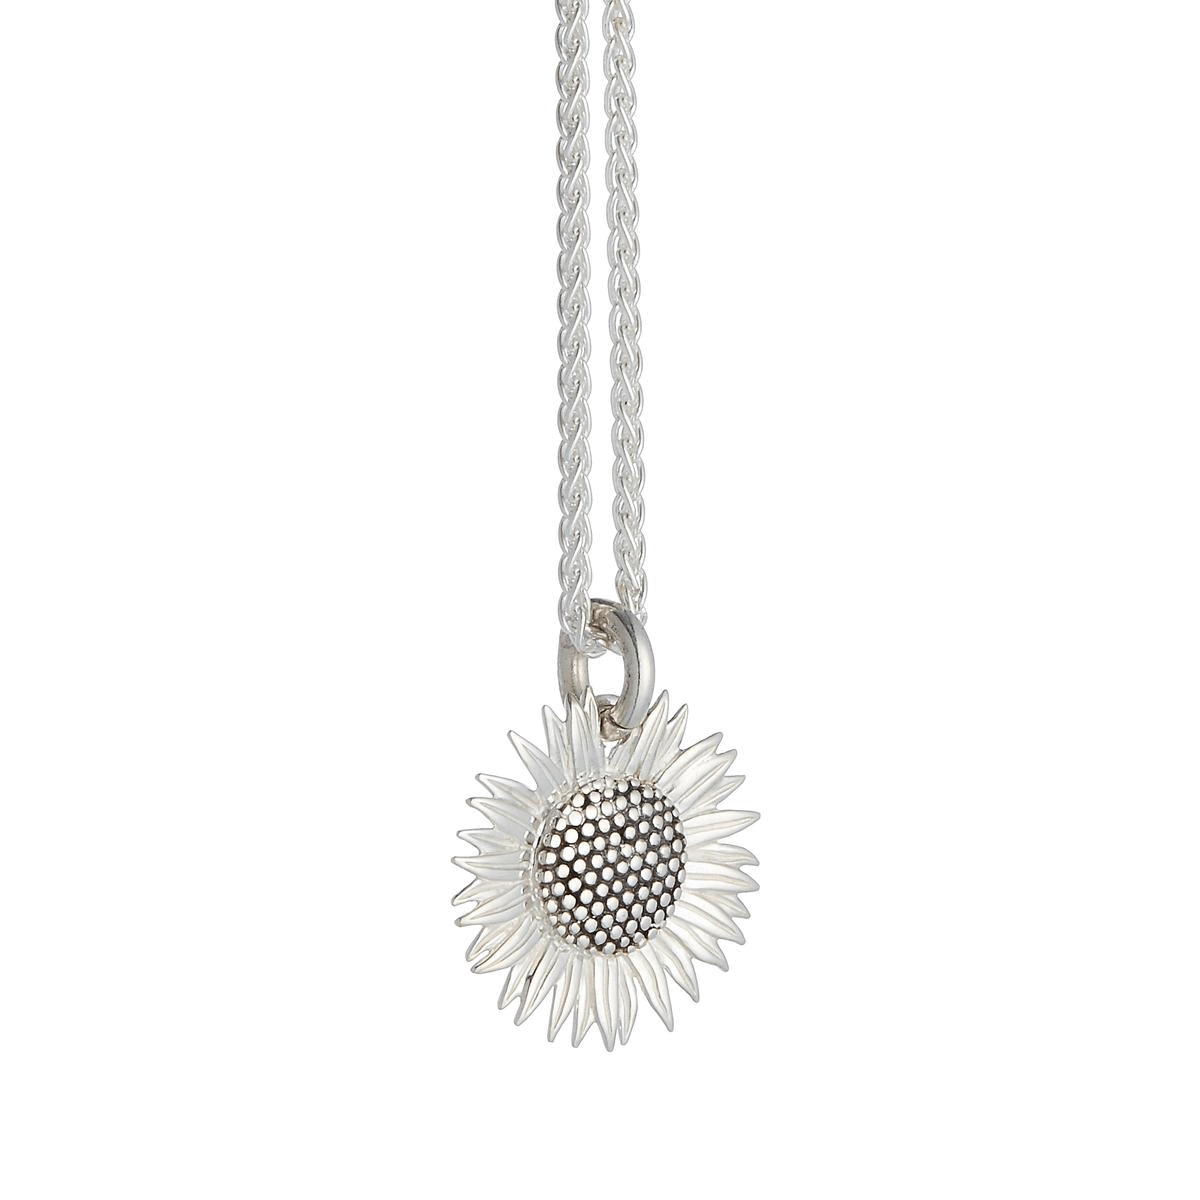 Sunflower Silver Necklace